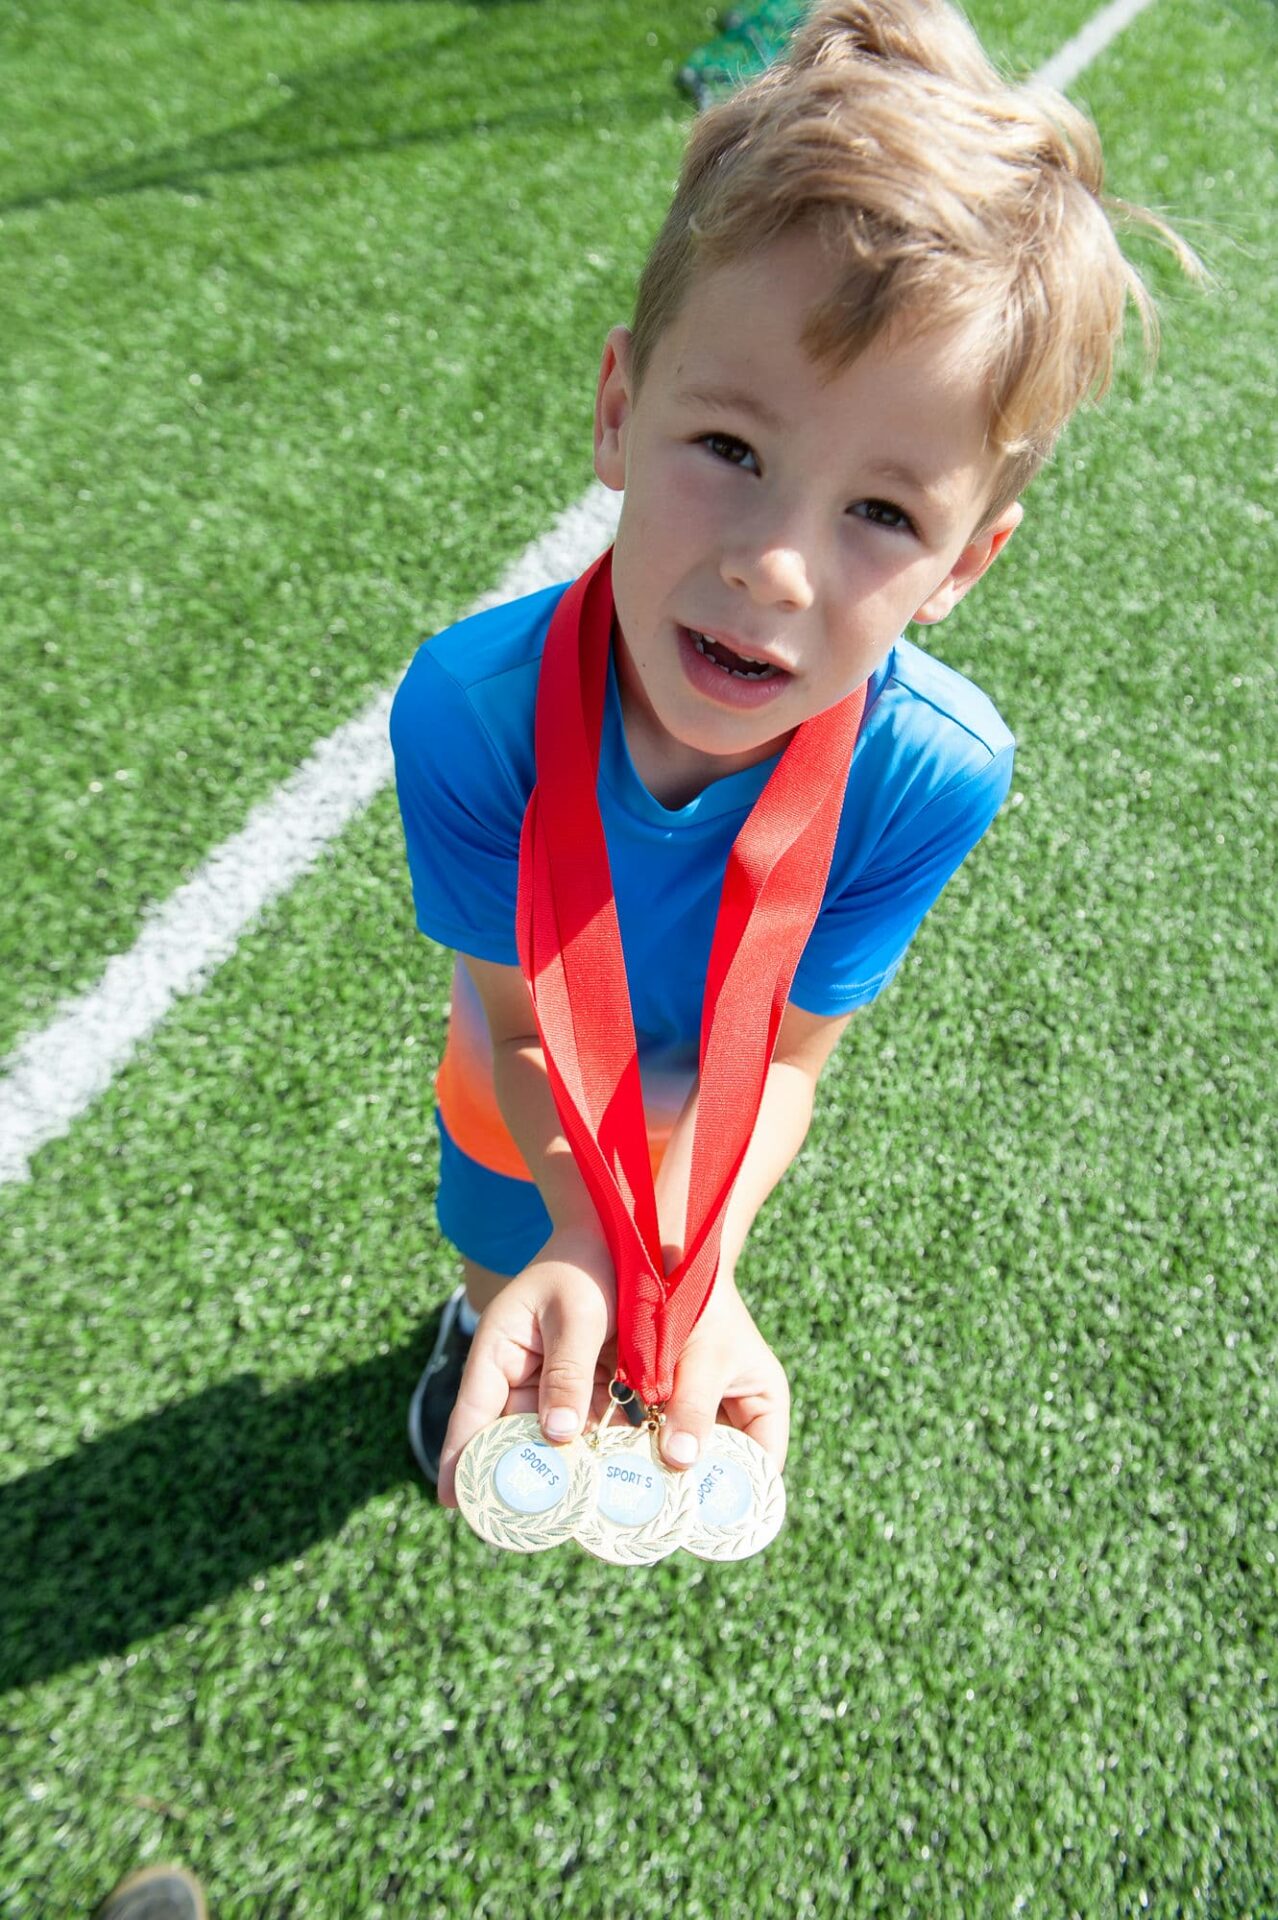 A young boy shows his medals that he won for taking part in sports games at a family fun day summer party in Kilkenny